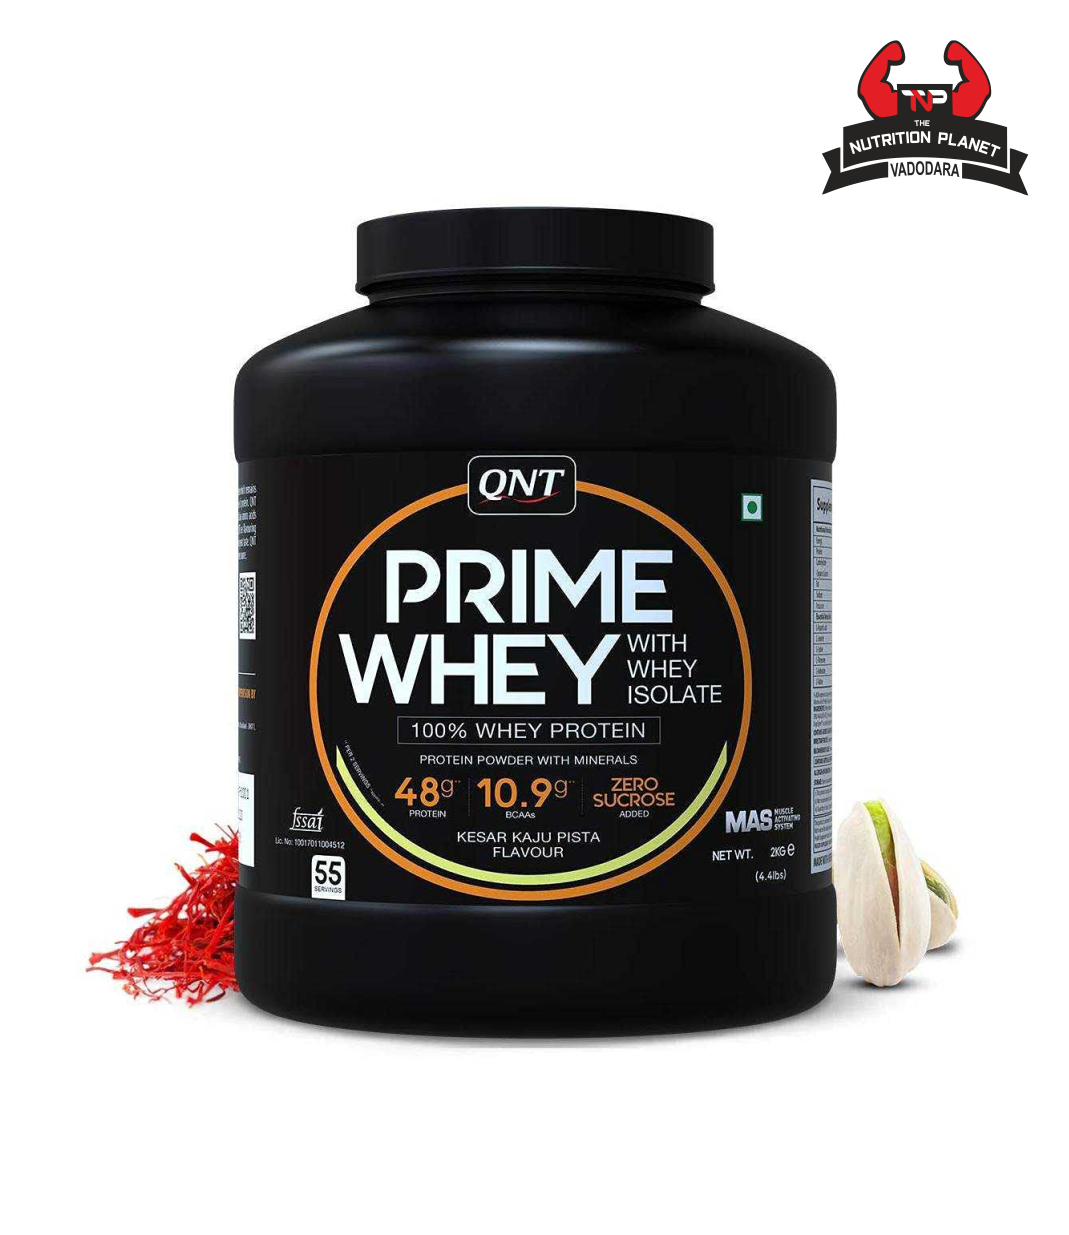 QNT Prime Whey, 100% Whey Protein with whey Isolate, 2kg 55 Servings (75% Protein, 10.9g BCAA, Zero Sugar) with official Authentic Tag